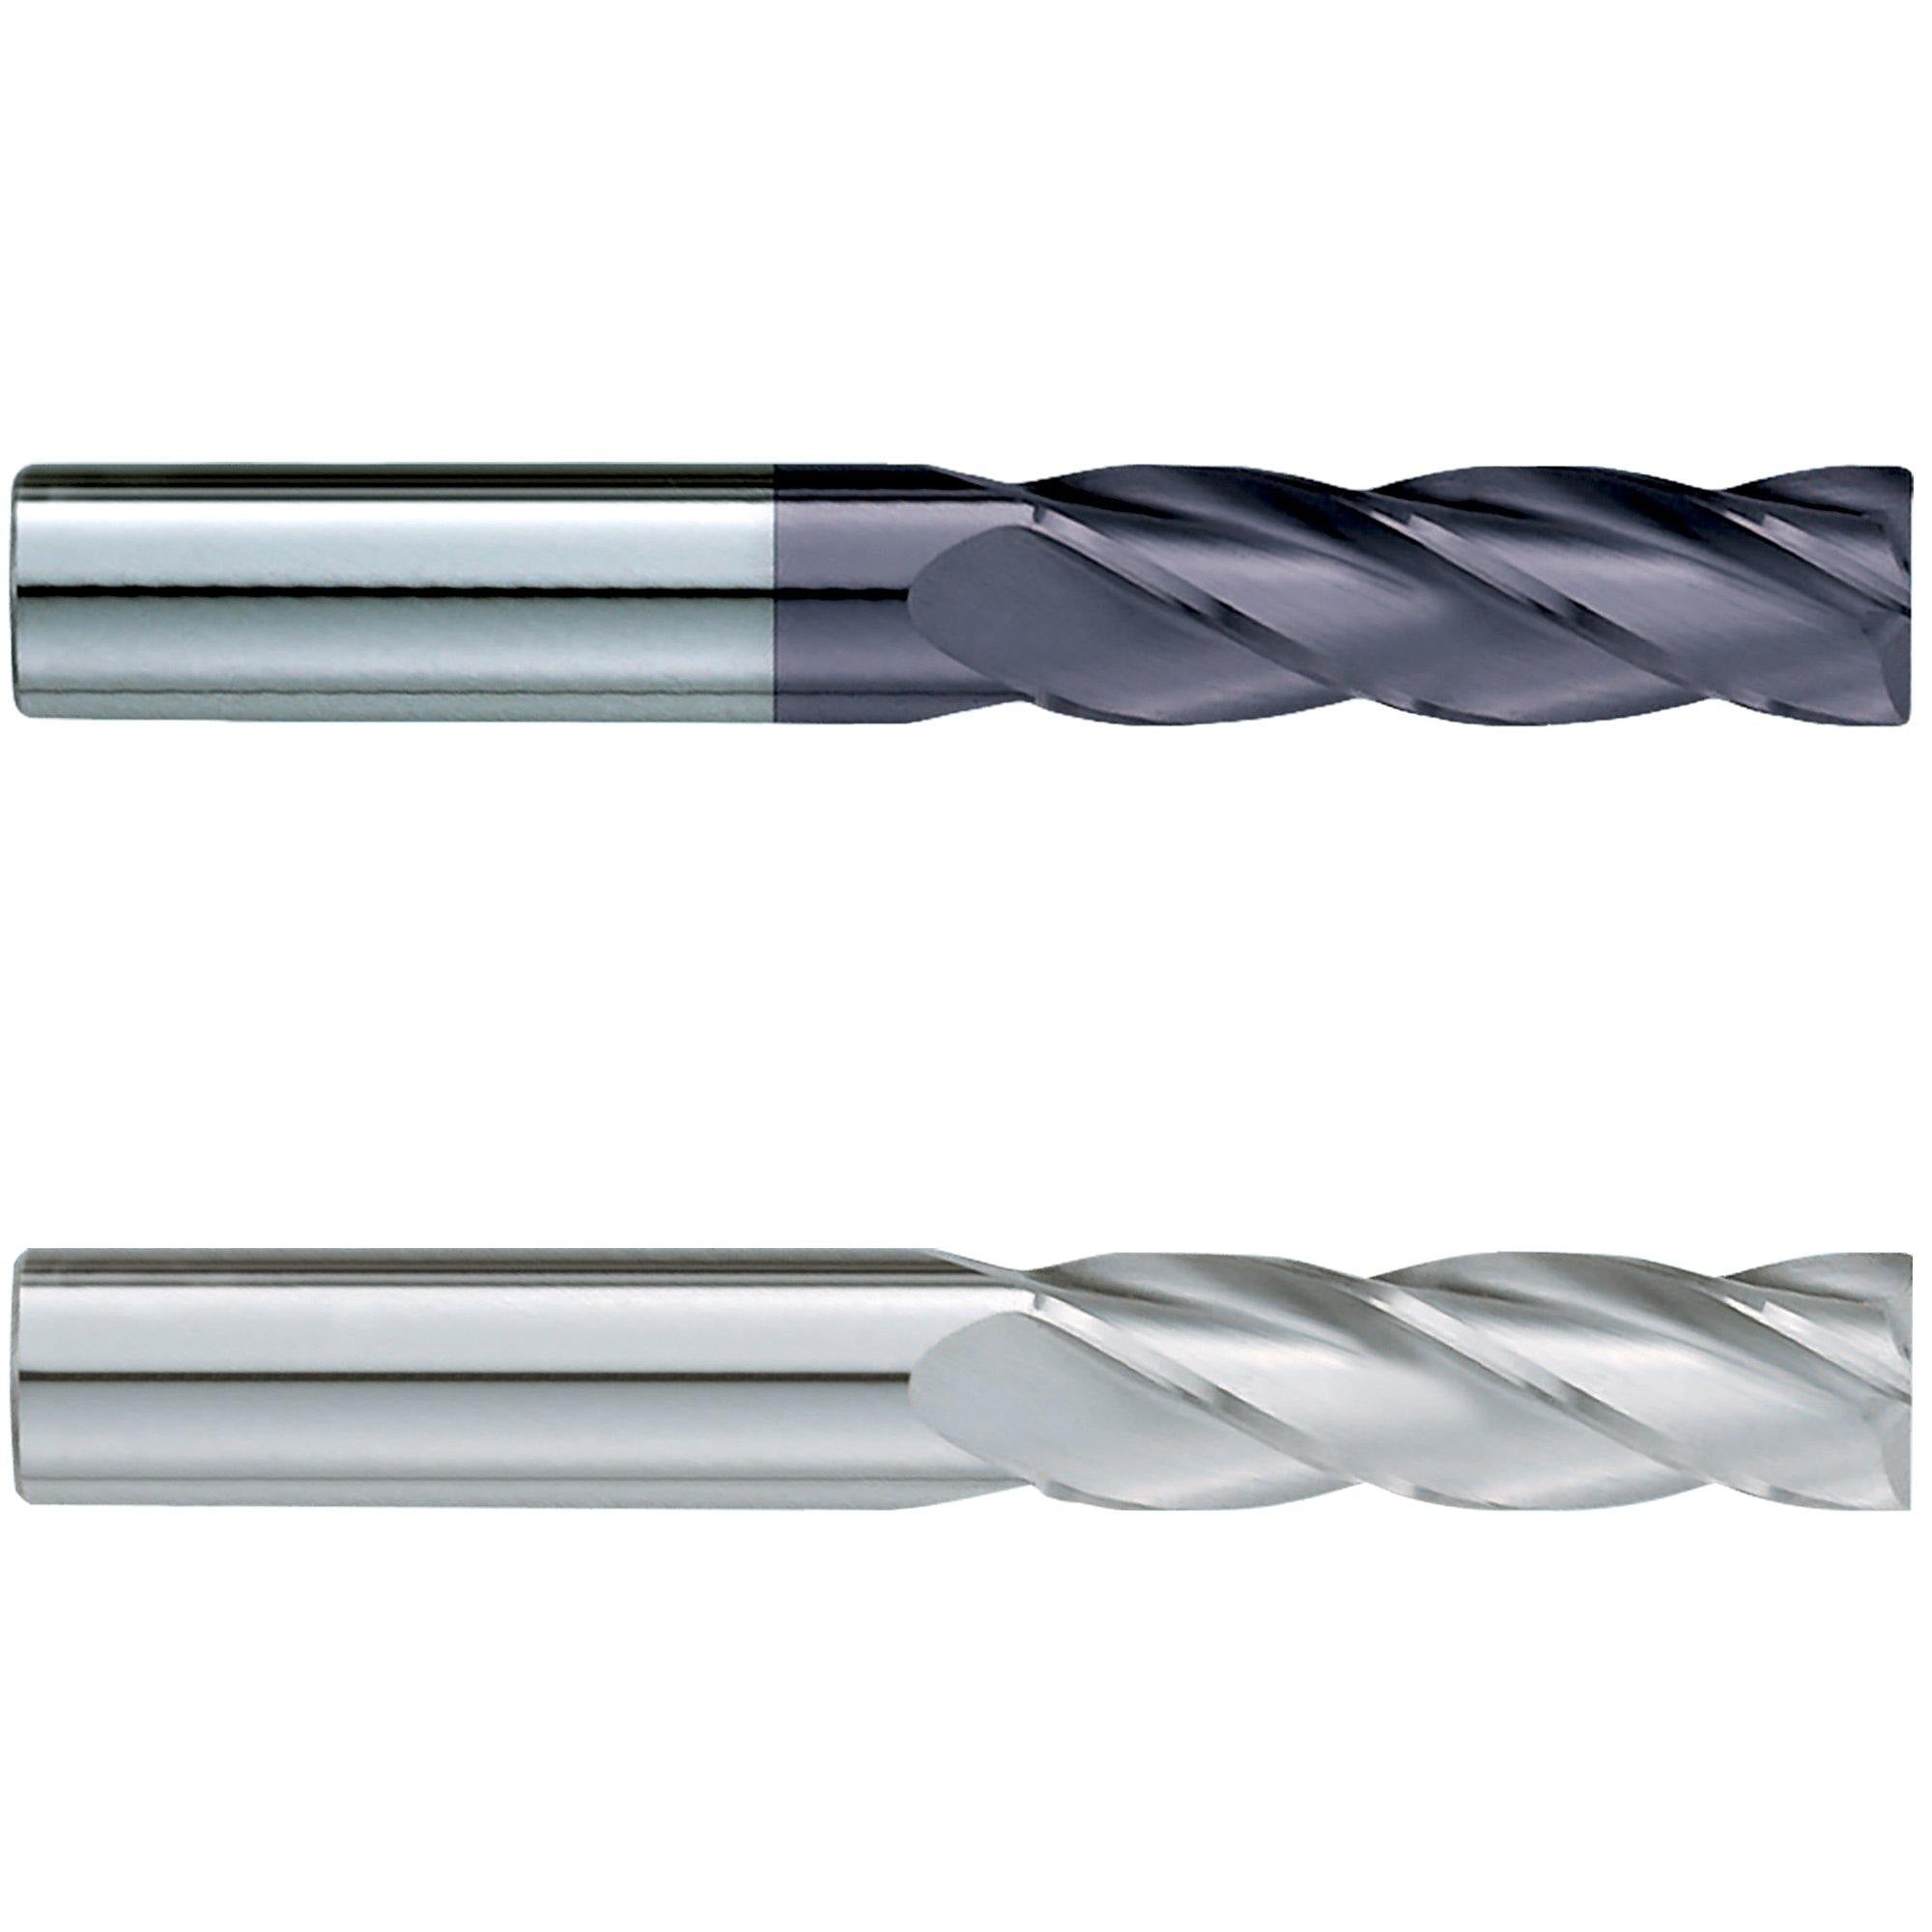 (2 Pack) 1" x 6" x 9" Super Long Square Carbide End Mill - The End Mill Store 